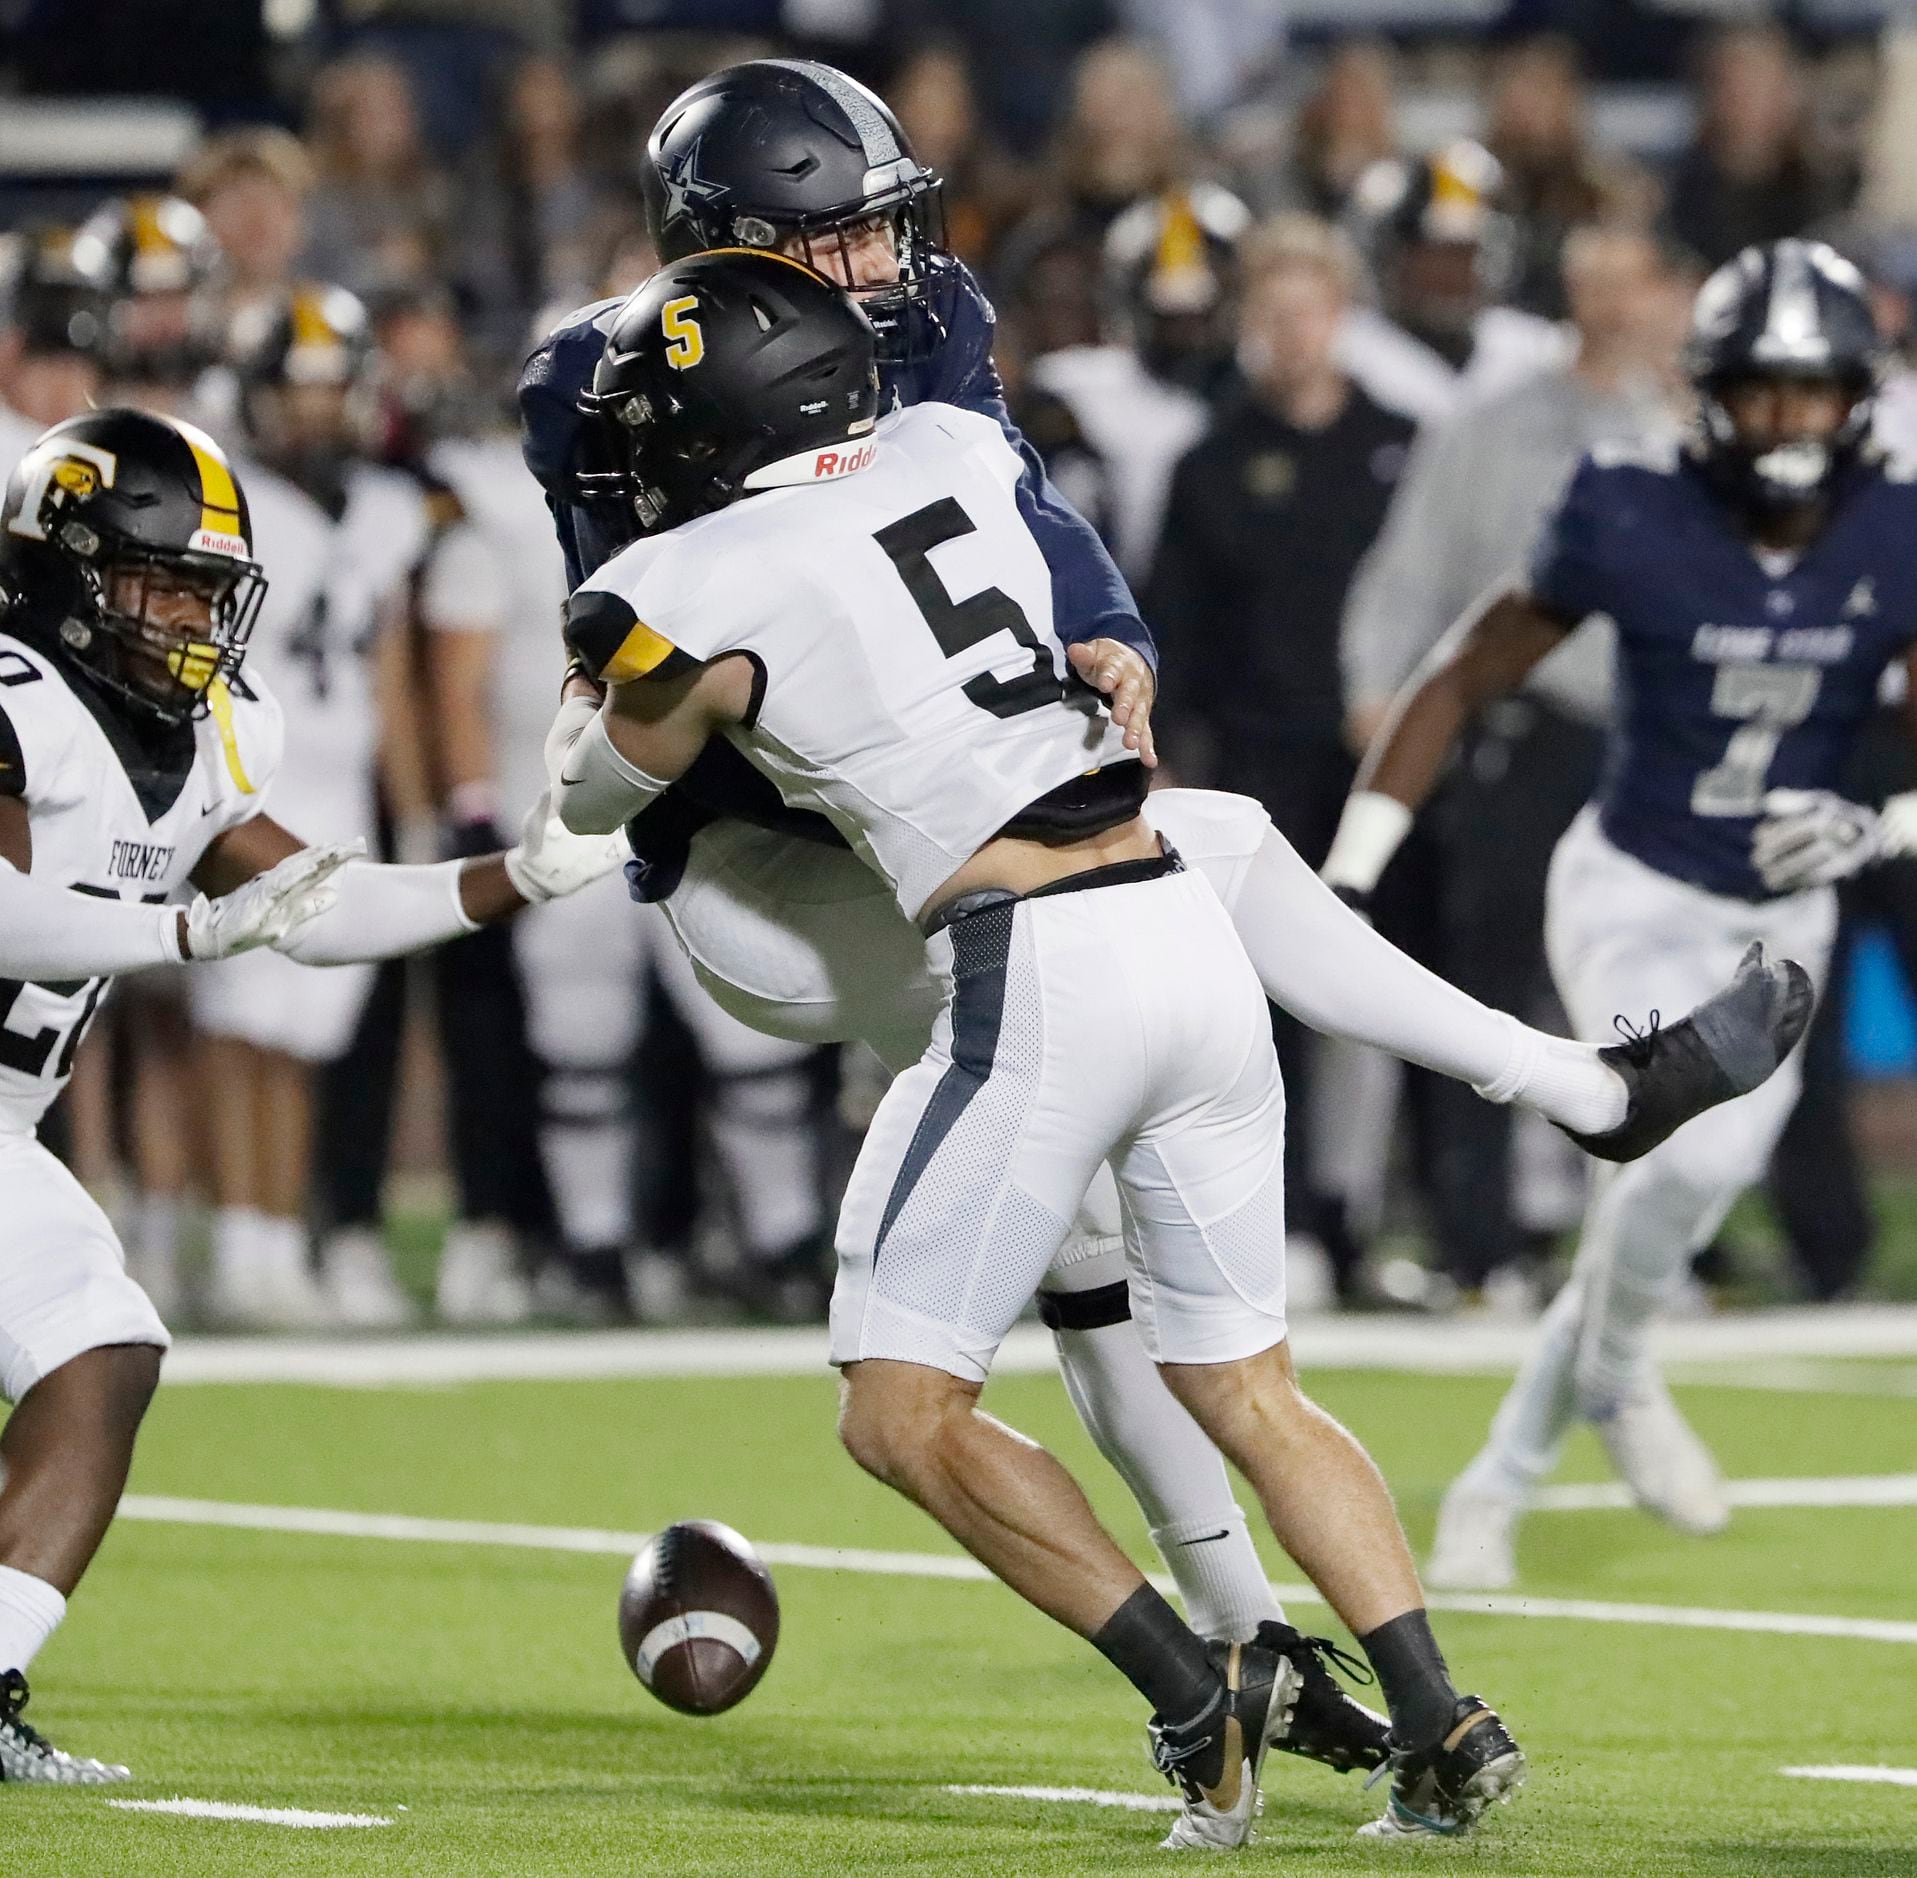 Lone Star High School punter Chase Lanham (88) has his punt blocked by Forney High School...